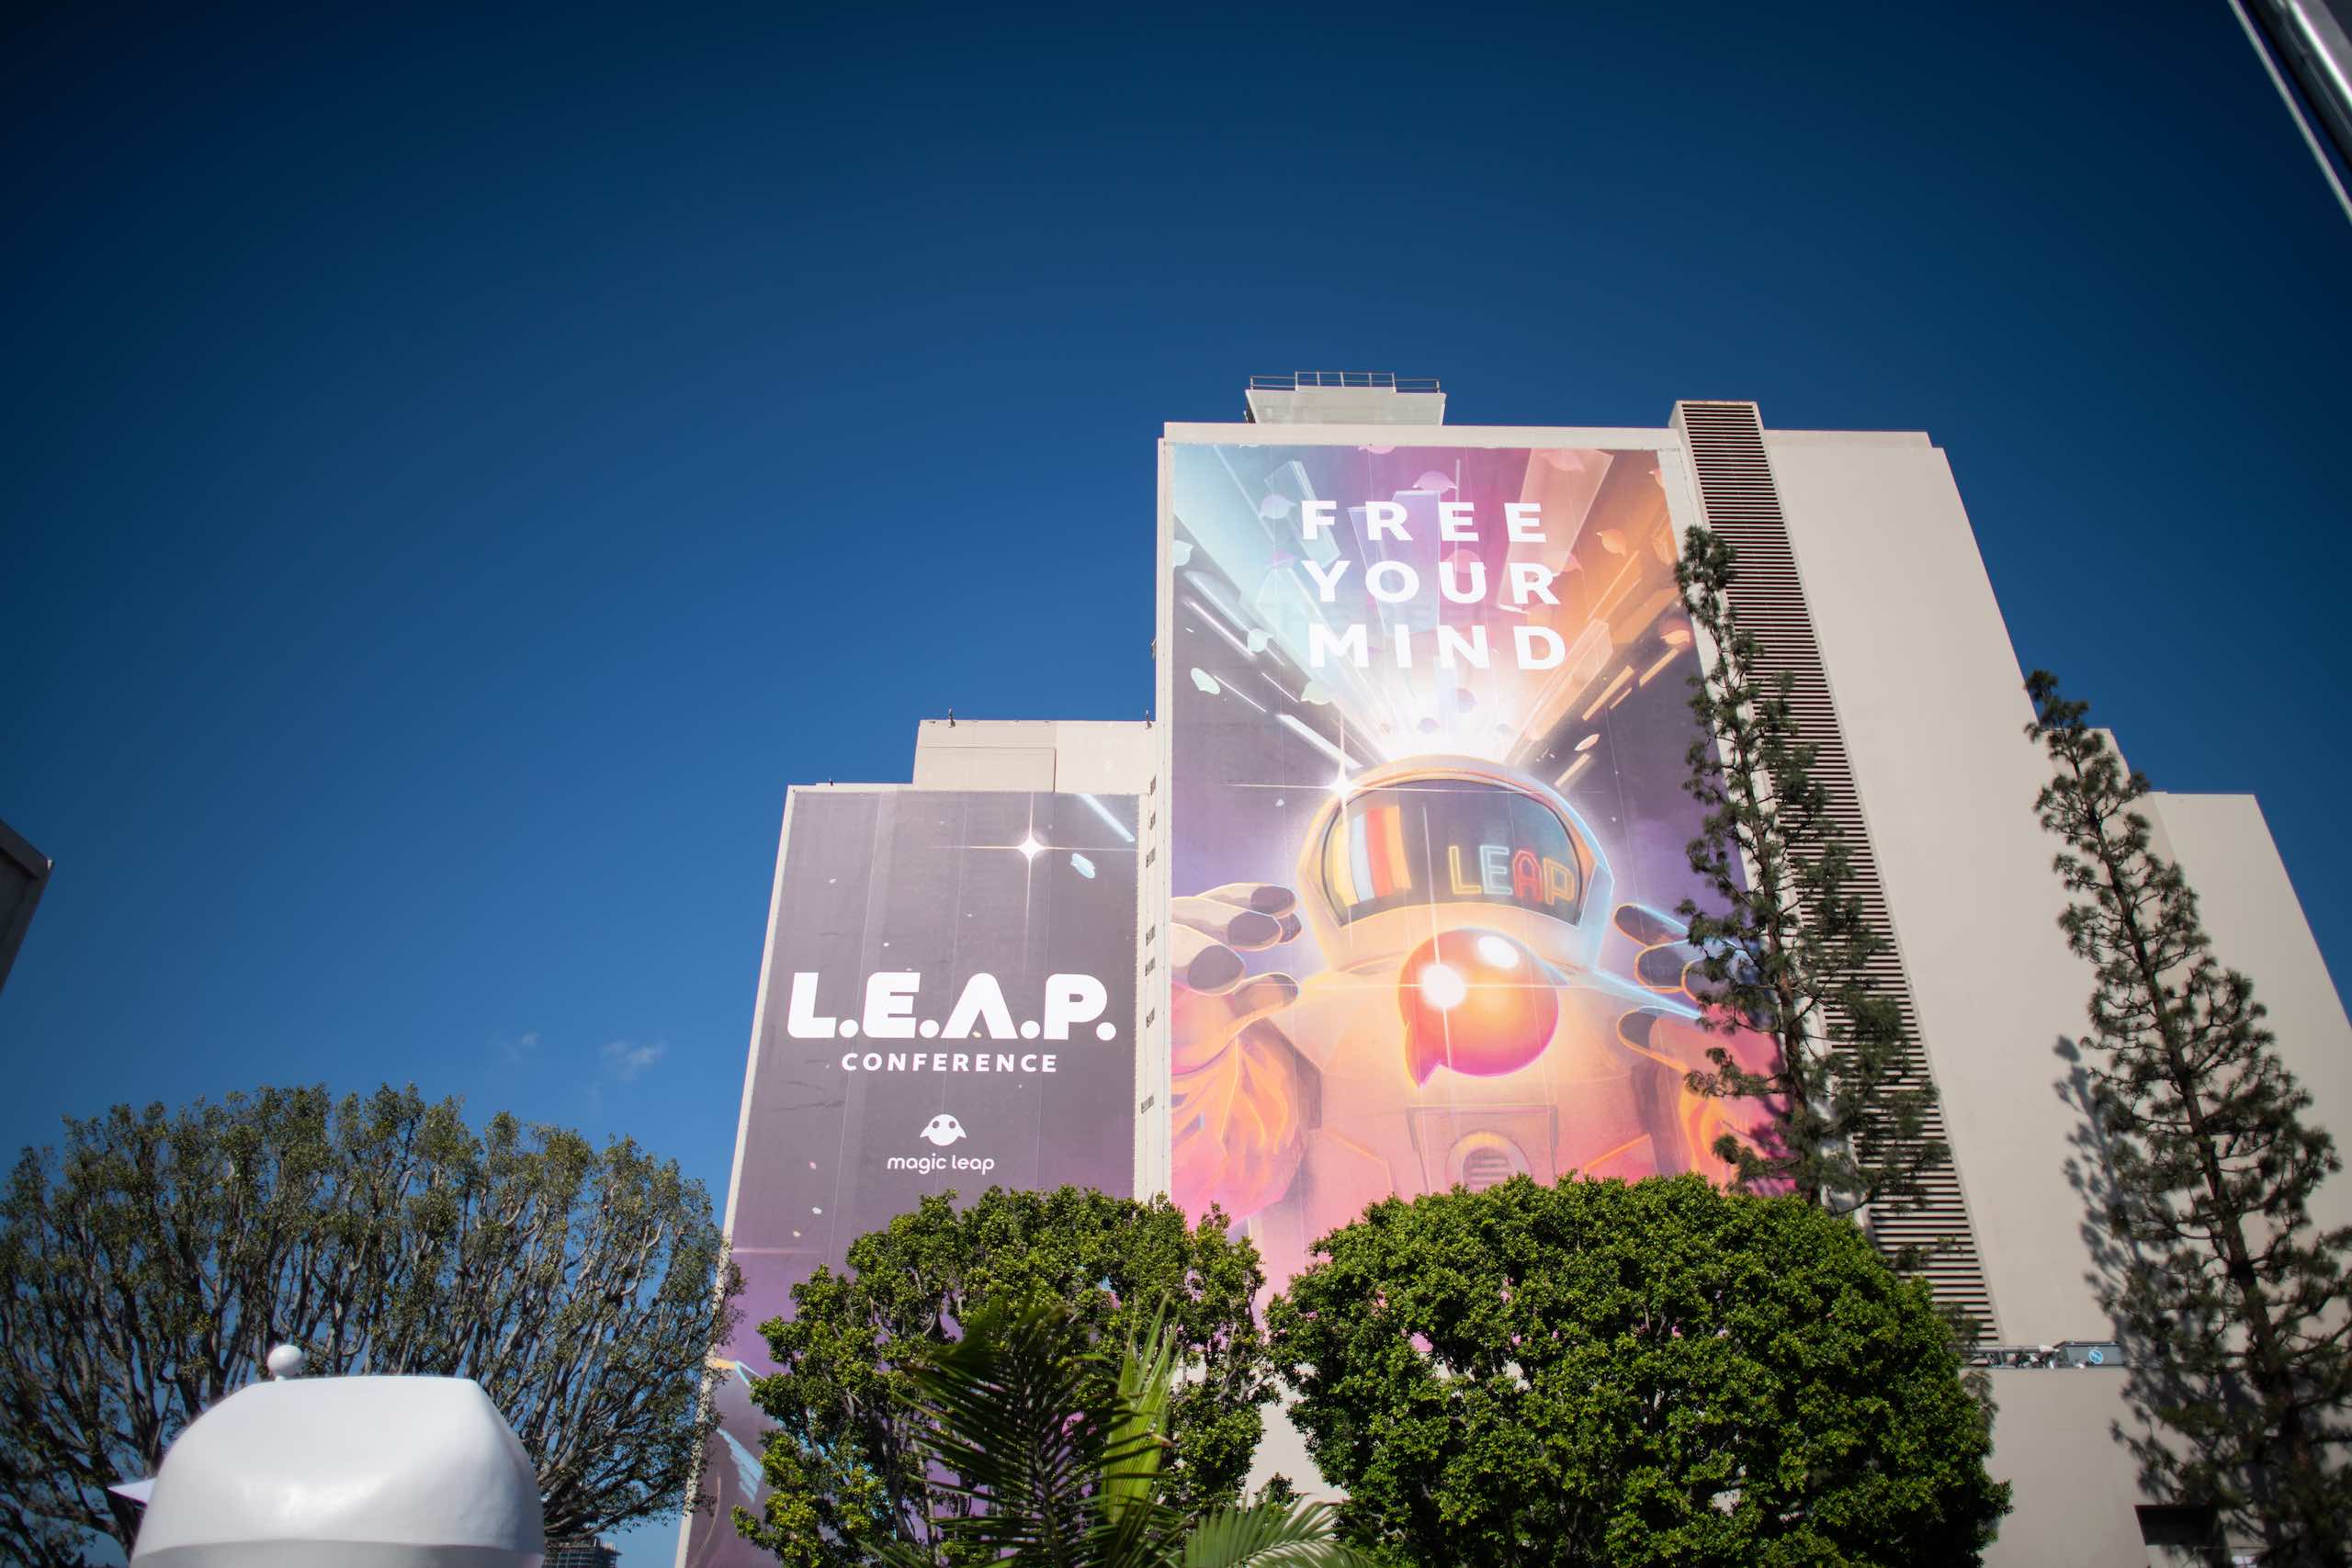 LEAP Conference Magic Leap and Free Your Mind banners on display on side of a building